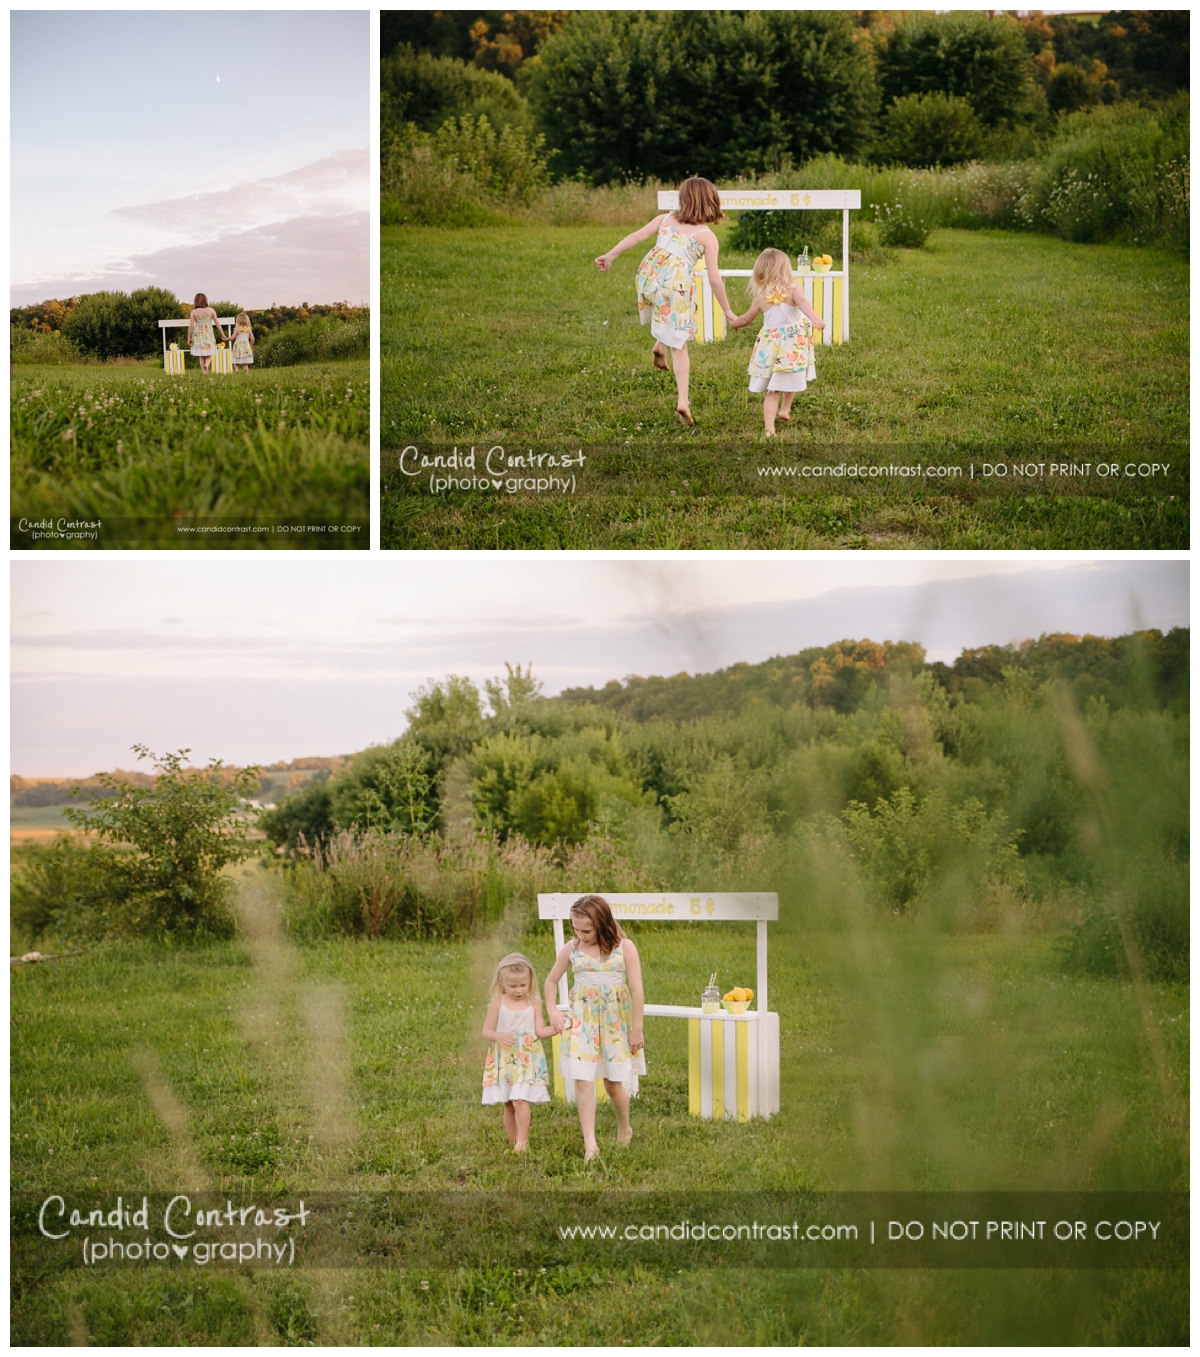 lemonade stand summer photos, Candid Contrast Photography, lifestyle photography, Bellevue Dubuque IA